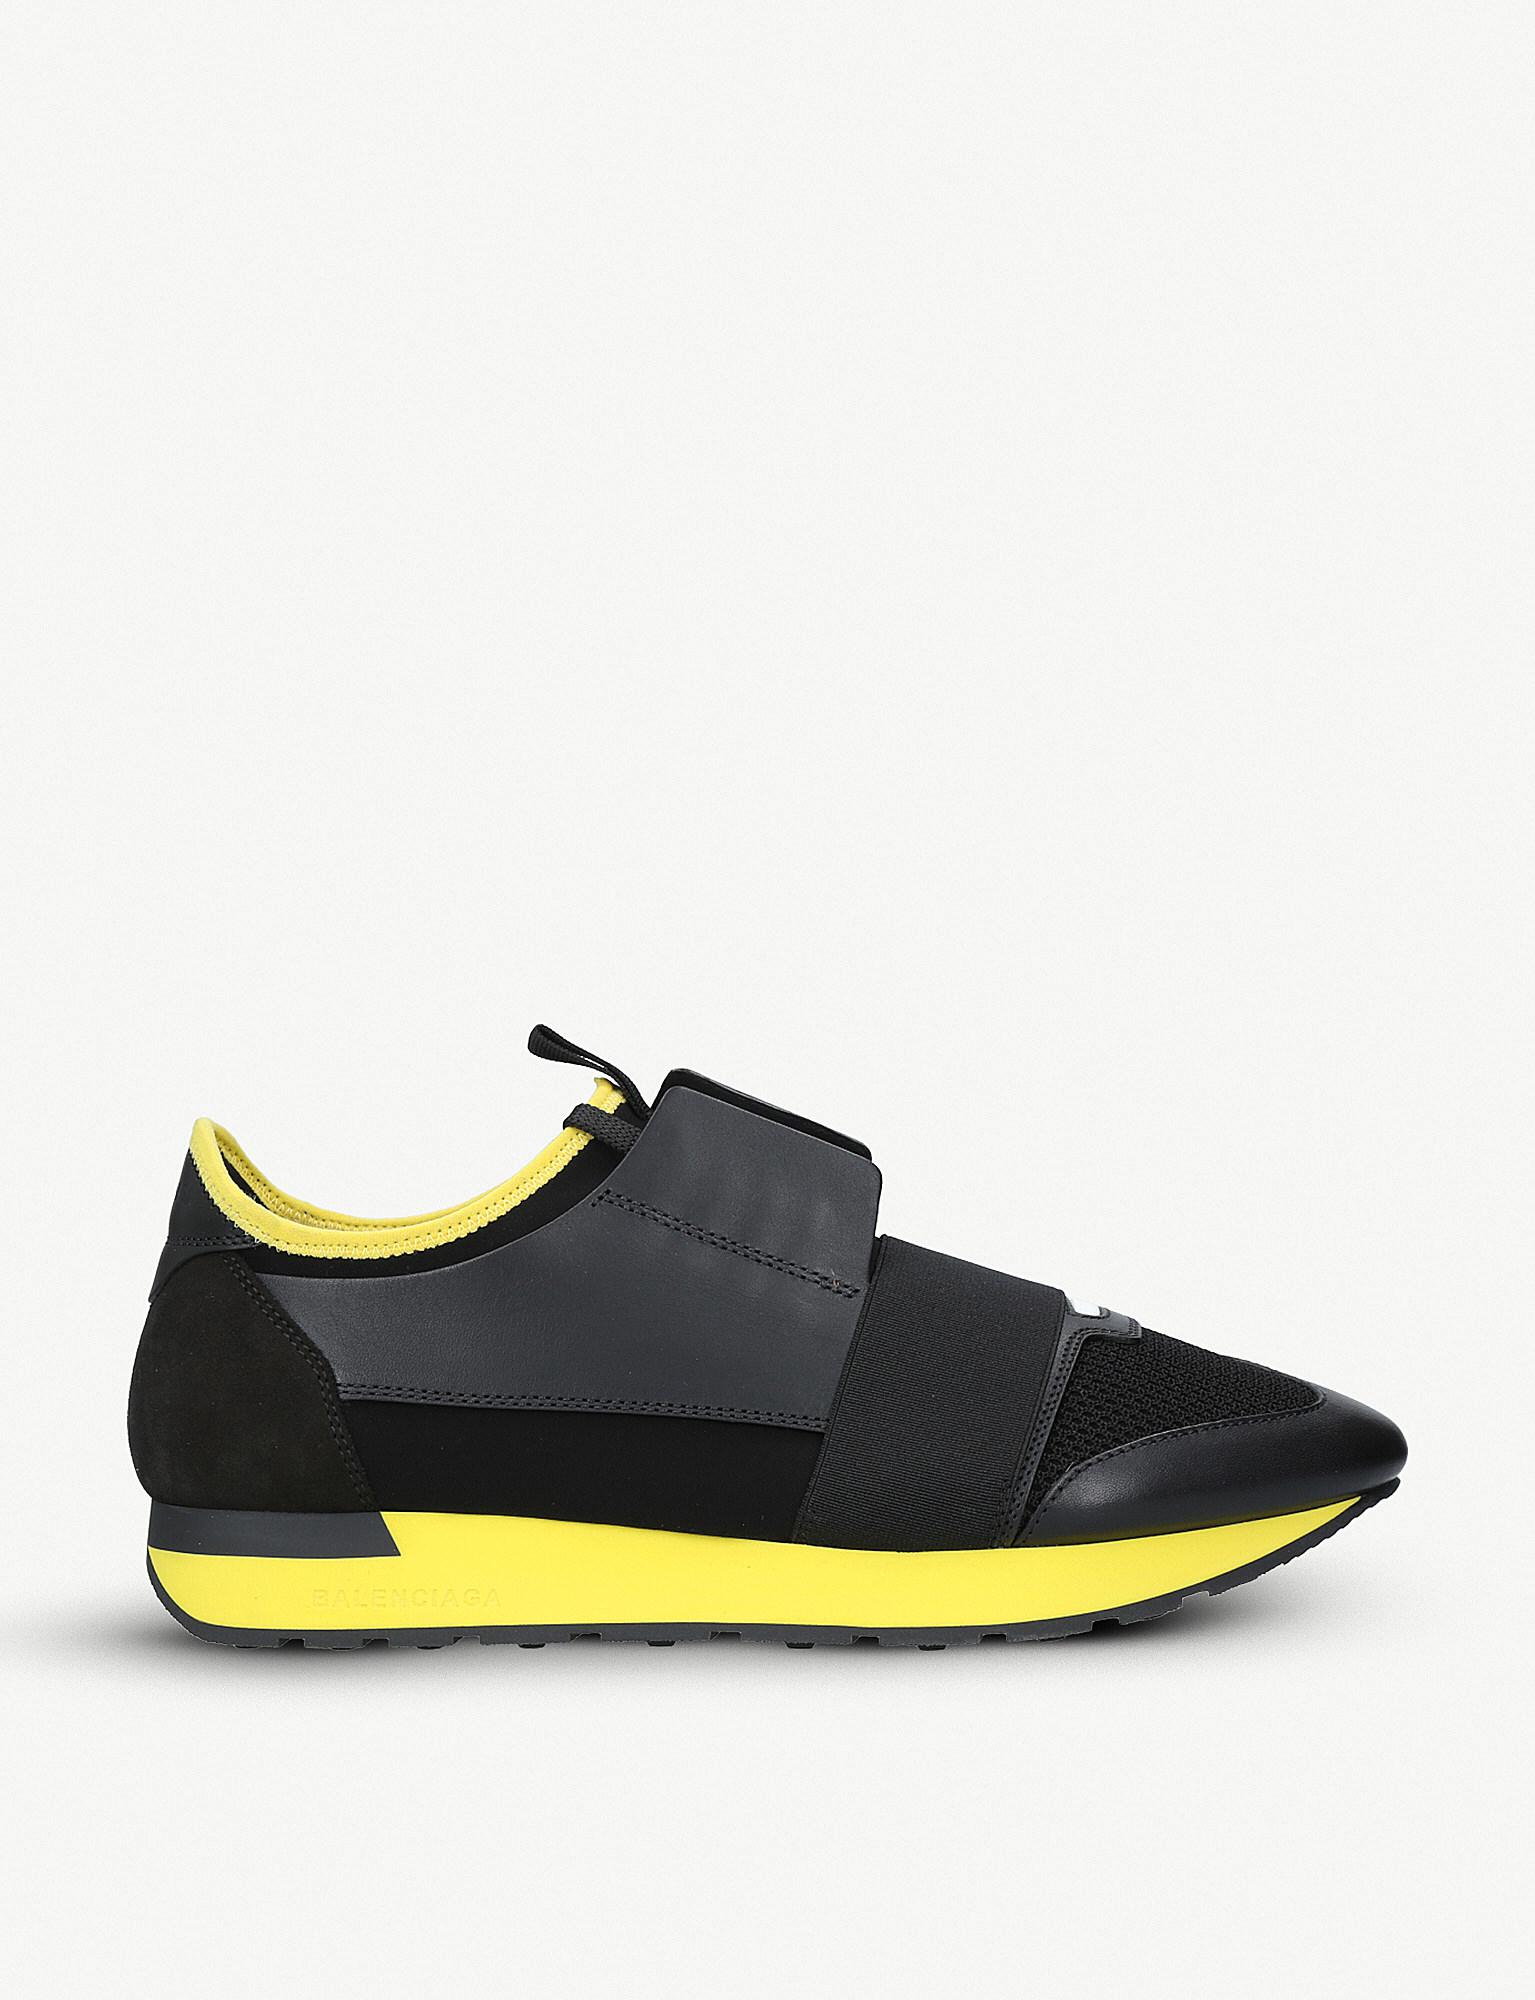 Balenciaga Mens Black And Yellow Striped Race Runners Leather And Suede  Sneakers in Black/Yellow (Blue) for Men - Lyst